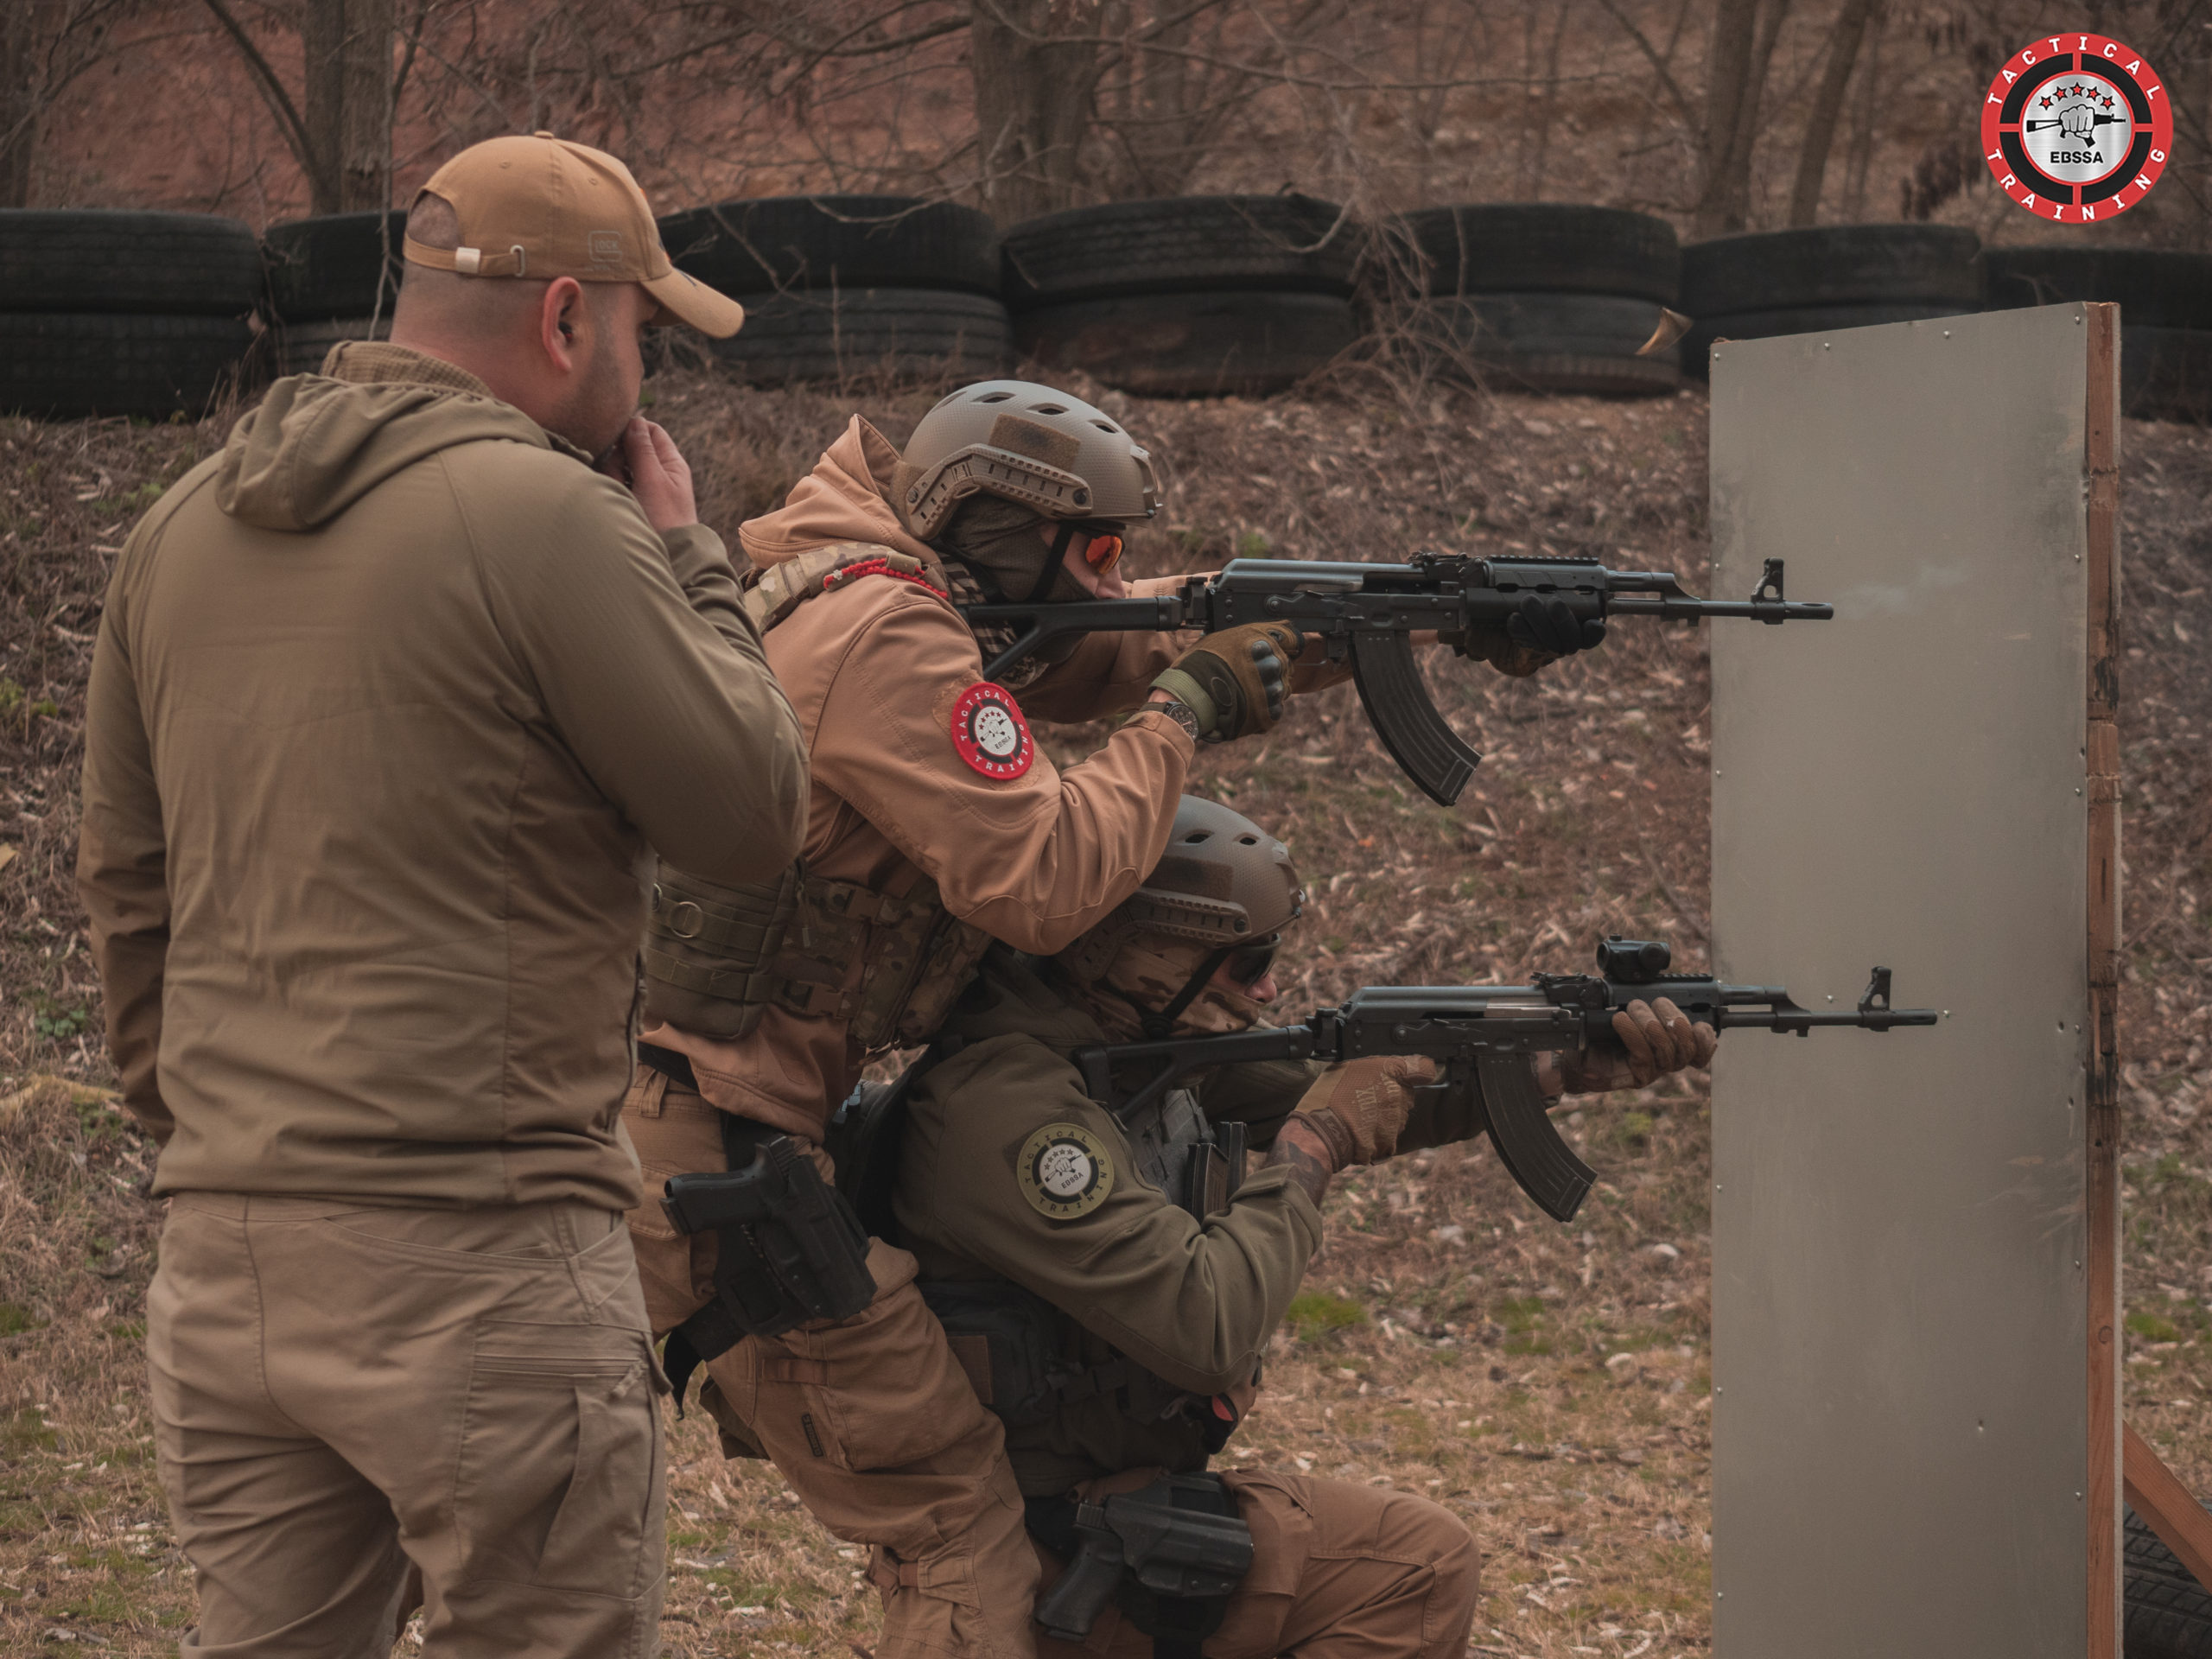 Aiming for Excellence: The Path to Becoming a Certified Firearms Instructor